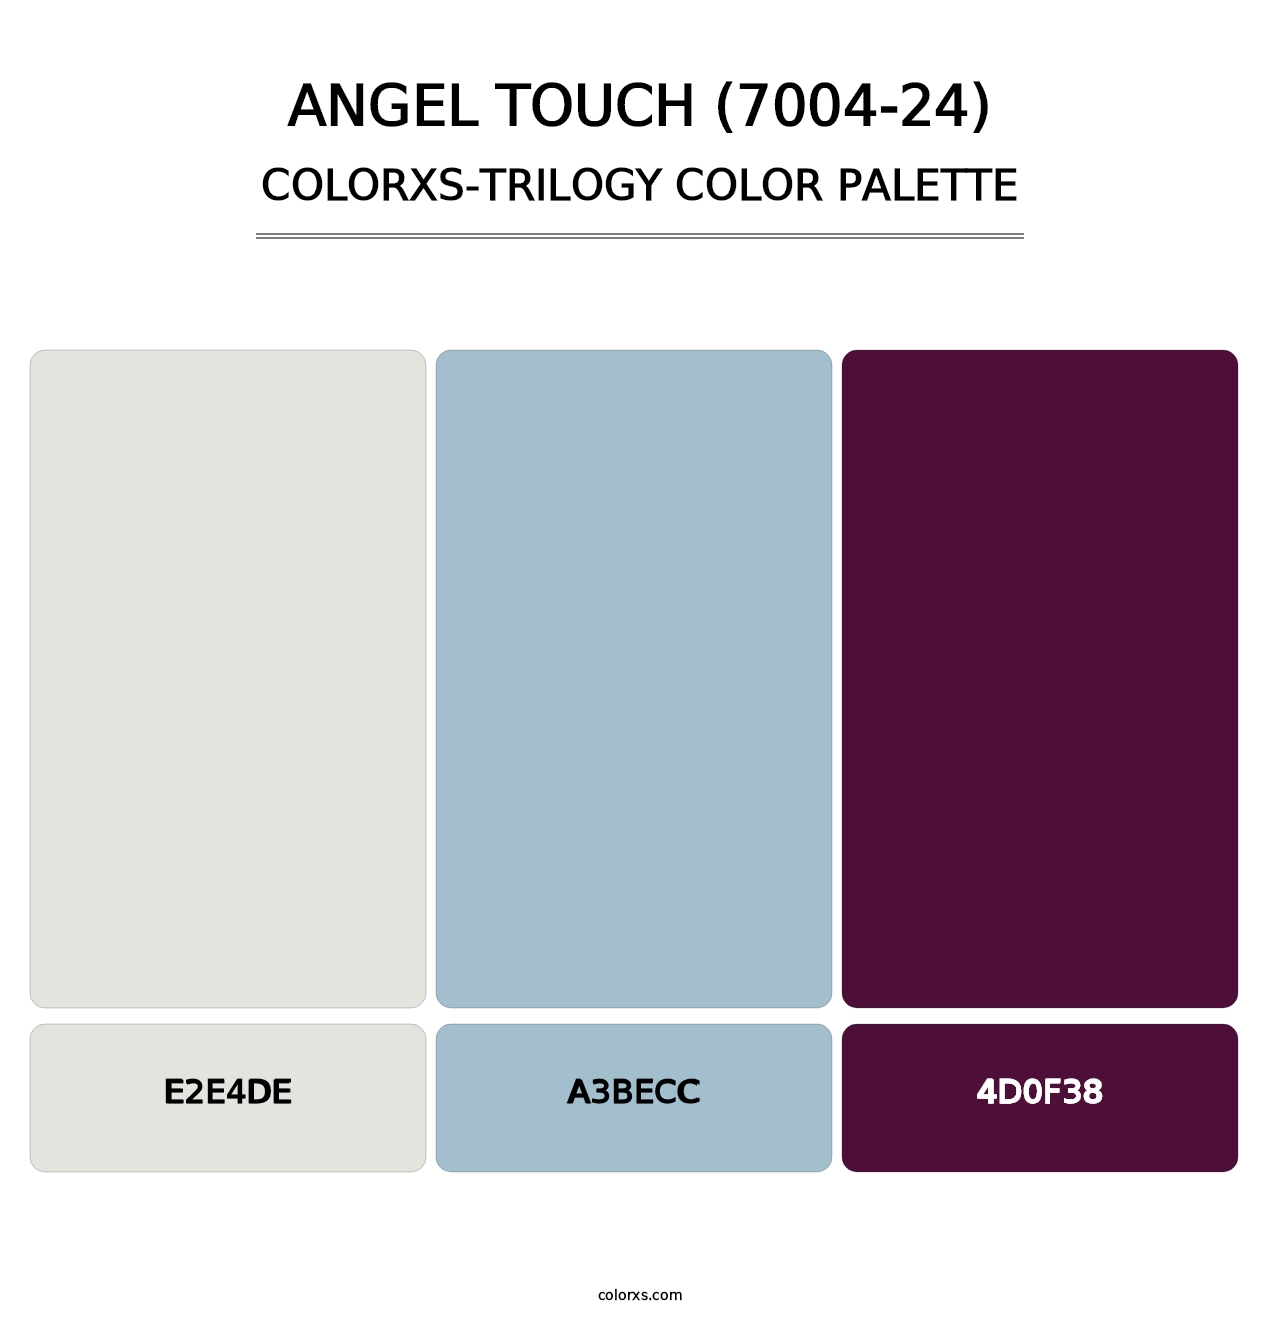 Angel Touch (7004-24) - Colorxs Trilogy Palette